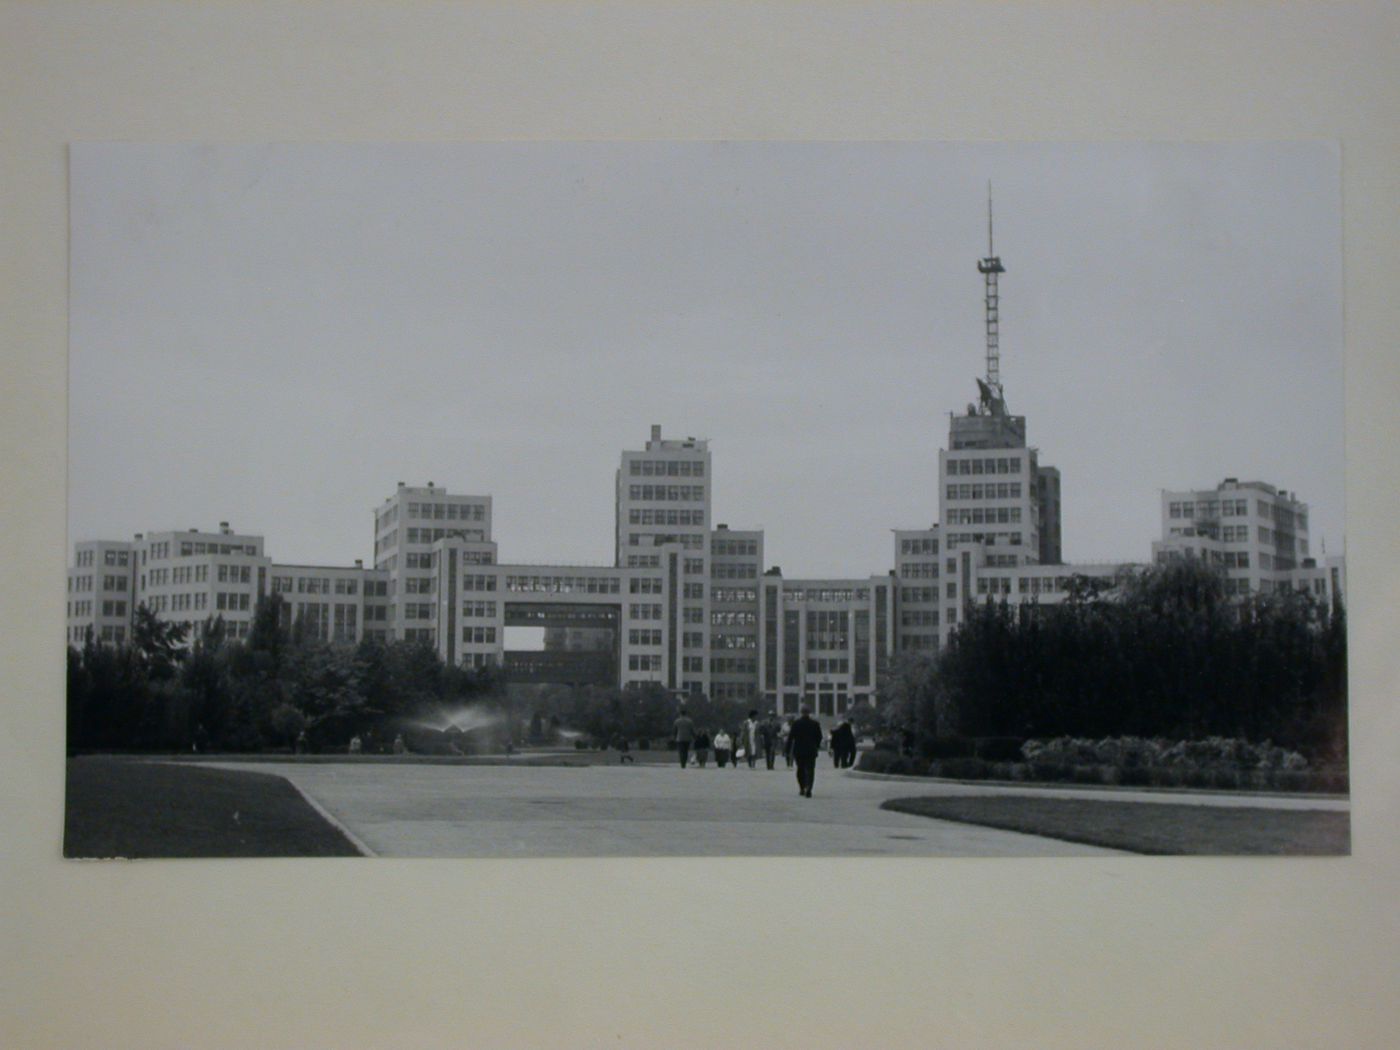 View of Department of Industry and Planning (Gosprom) buildings from Dzerzhinskaya Square, Kharkov, Soviet Union (now in Ukraine)